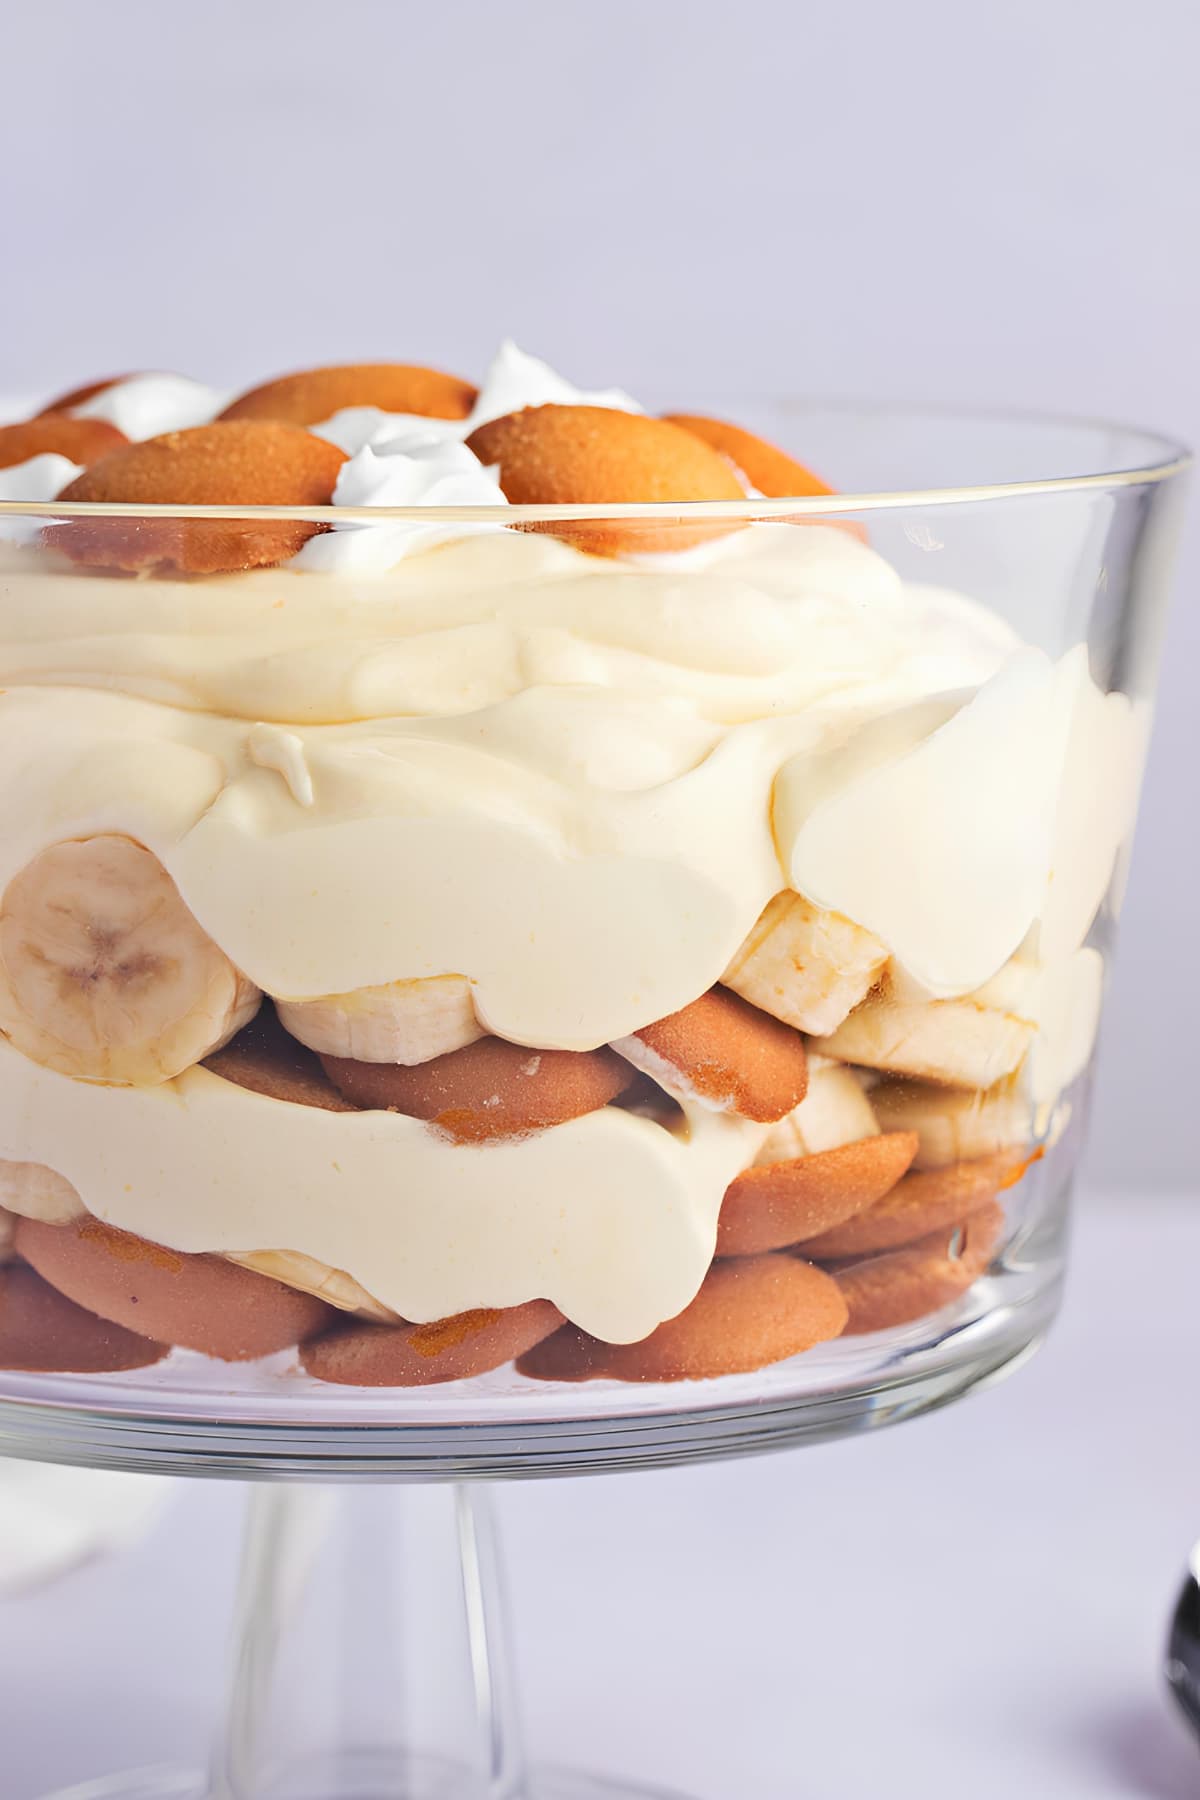 Homemade Banana Pudding in a Glass